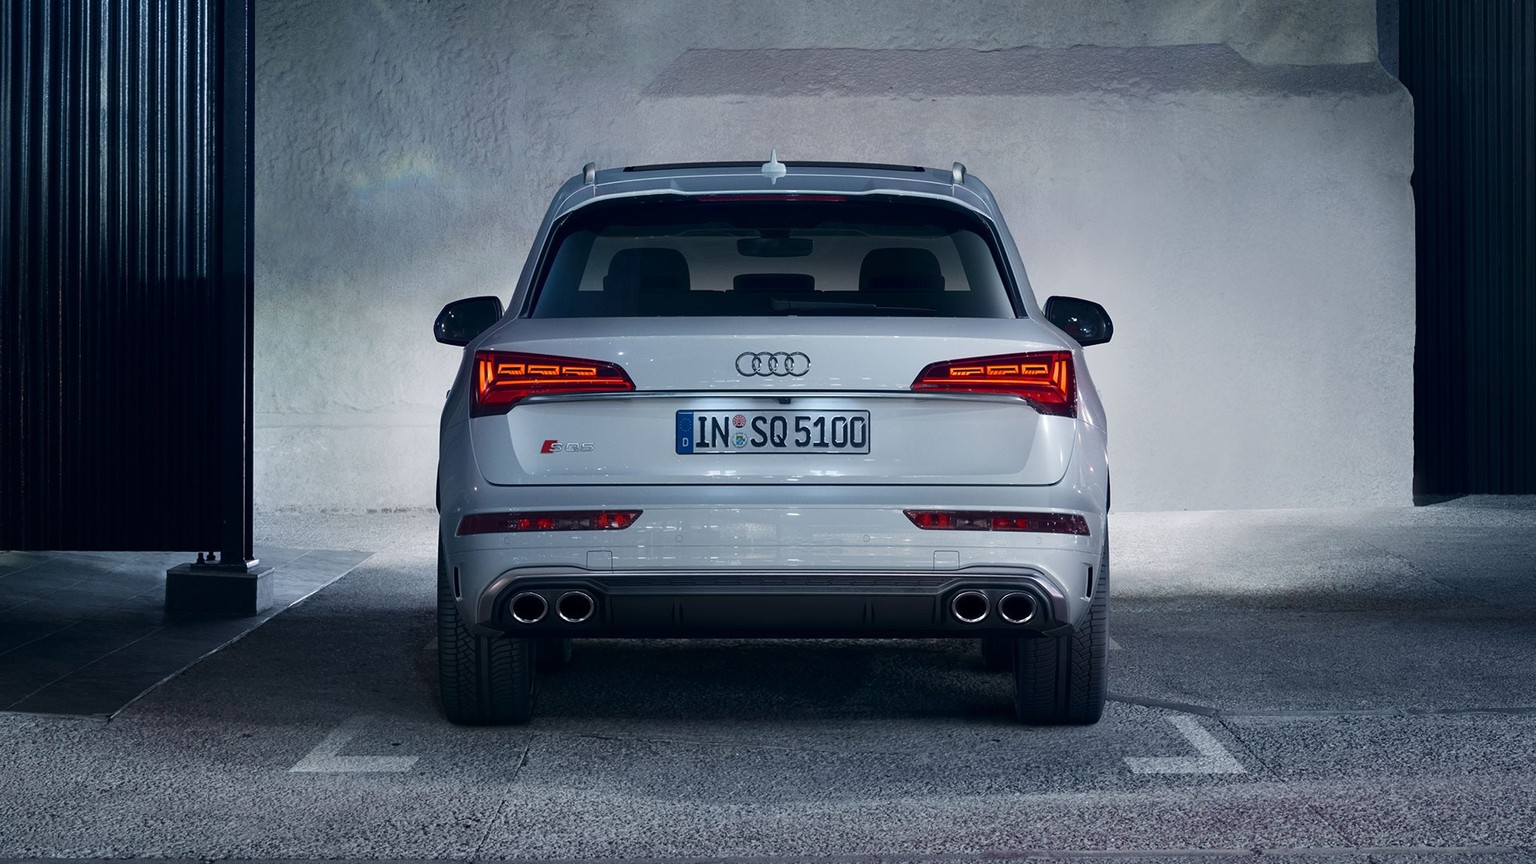 Rear view of the Audi SQ5